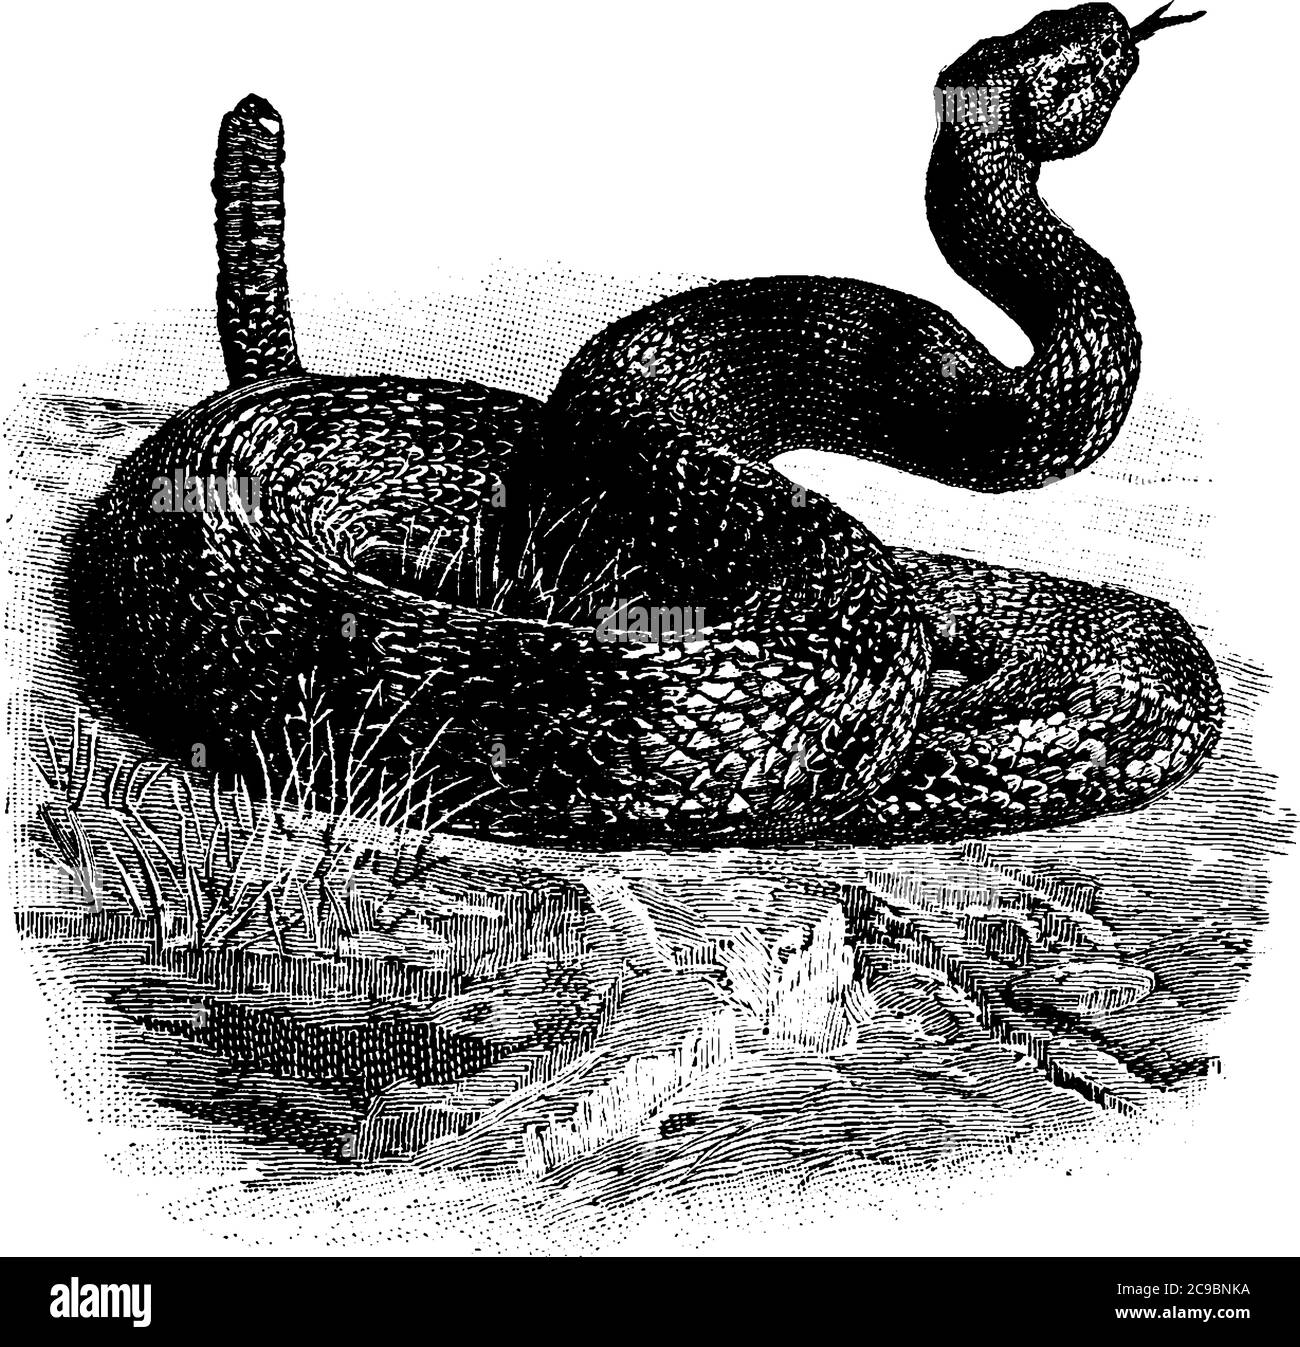 One of the largest snakes that are venomous serpents, whose tail ends in a rattle. It rattles its tail to warn potential predators to back off, vintag Stock Vector